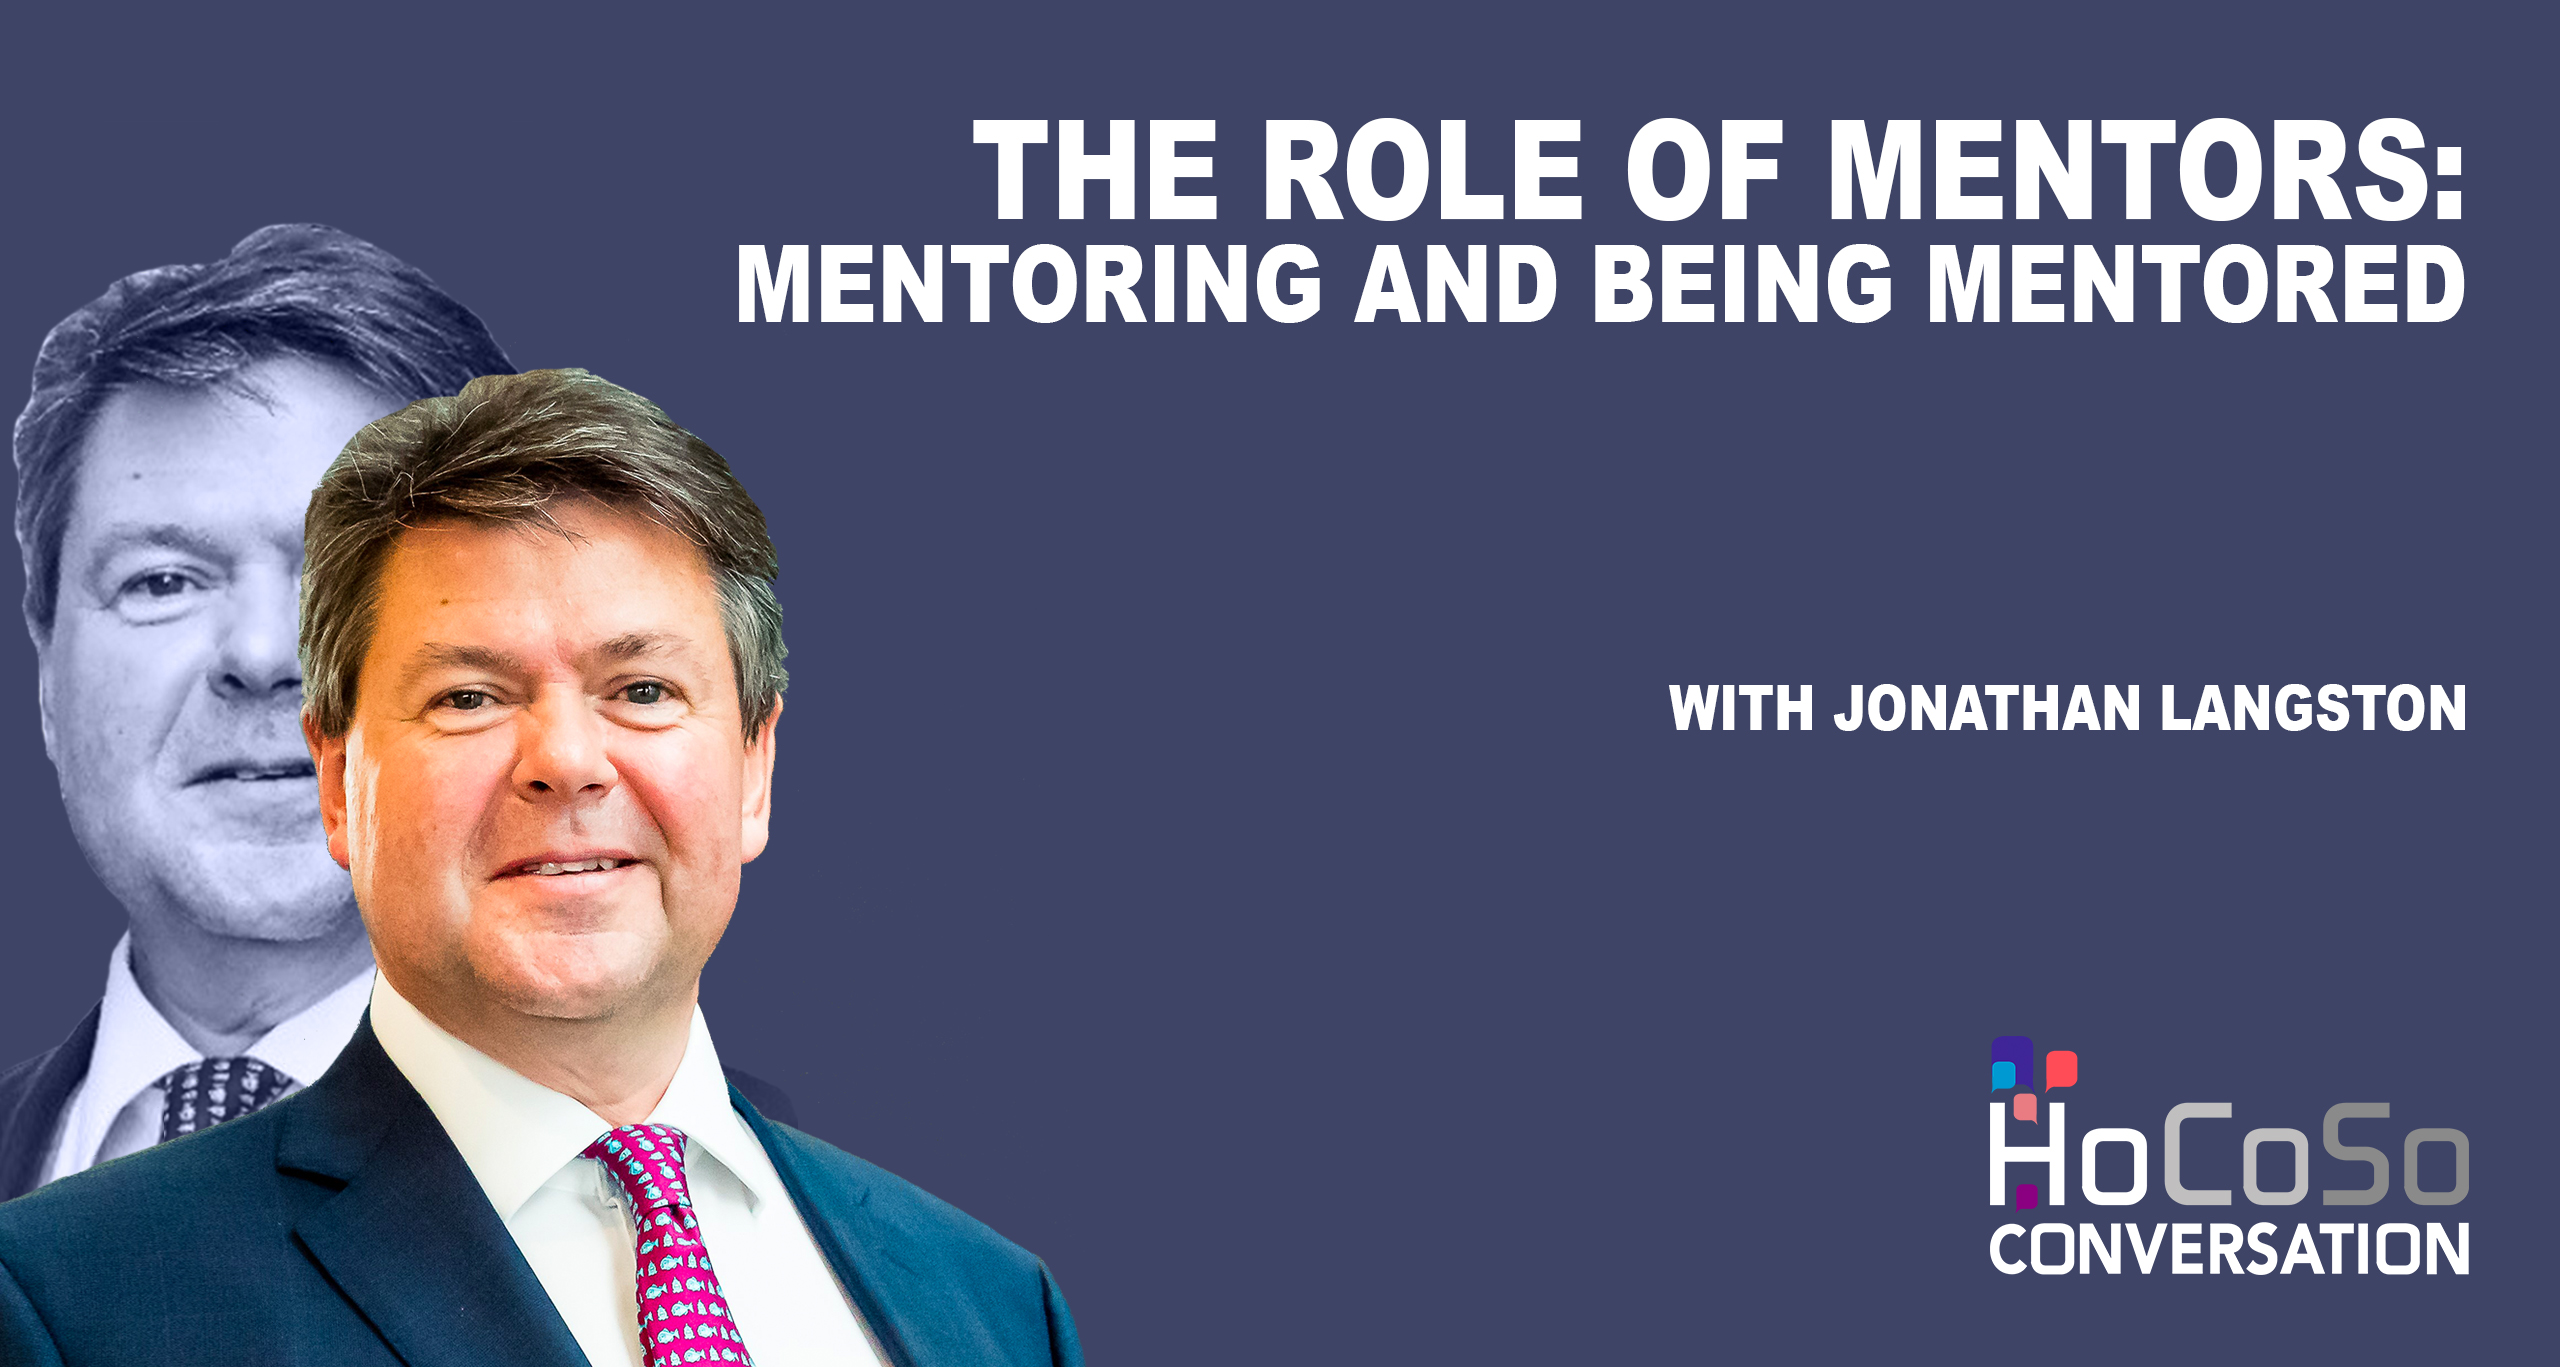 Podcast The role of mentors: mentoring and being mentored - with Jonathan Langston